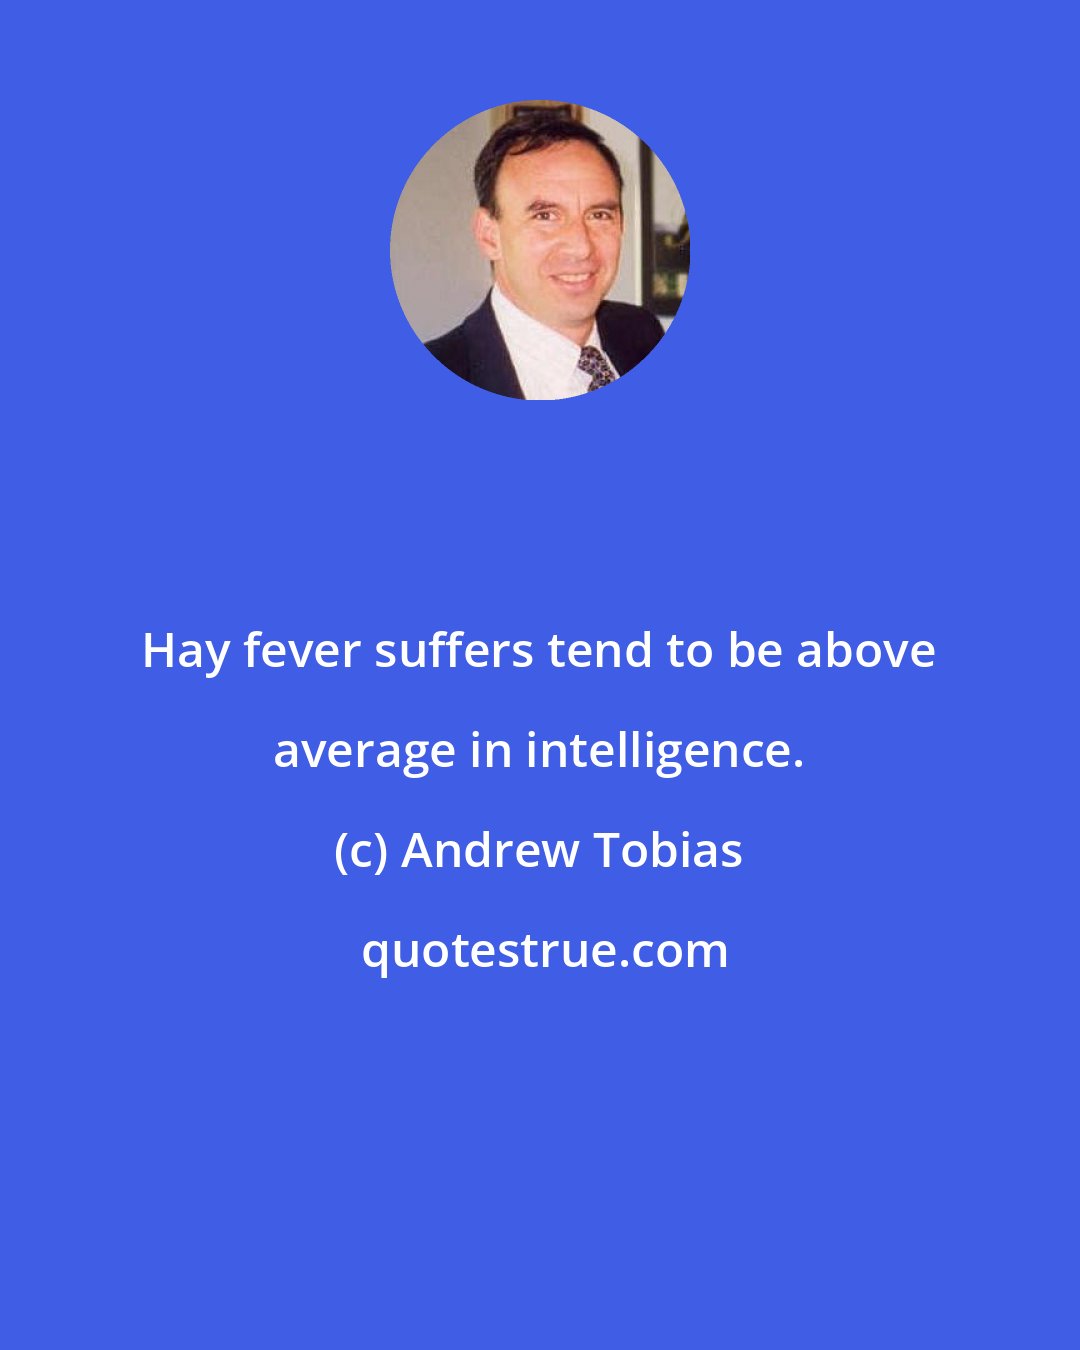 Andrew Tobias: Hay fever suffers tend to be above average in intelligence.